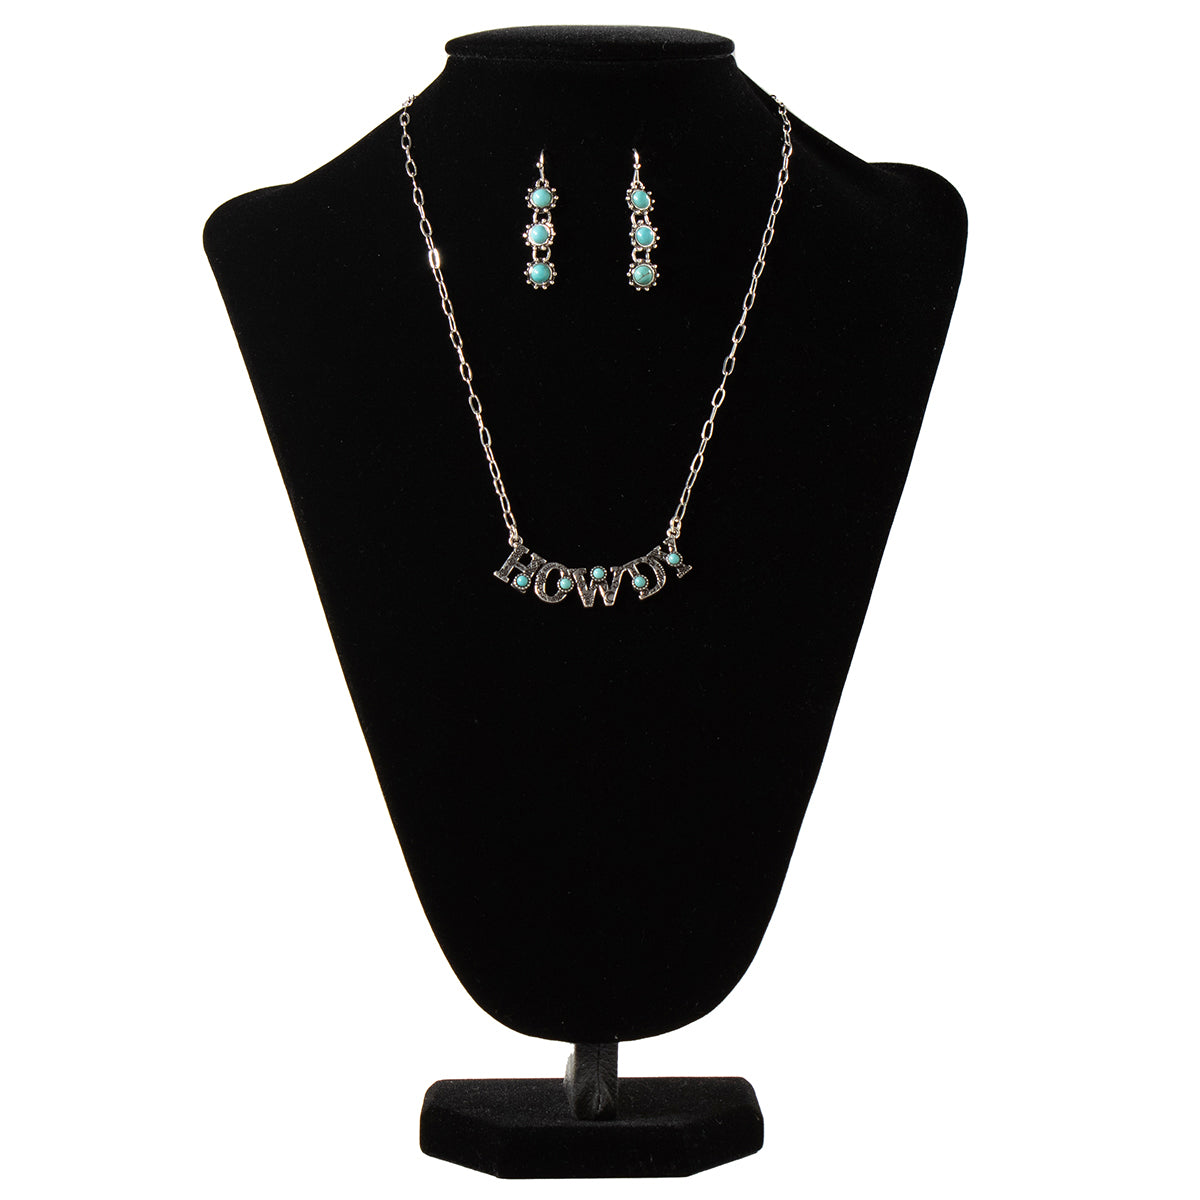 M&F Western Brushed Silver & Turquoise Stone Howdy Necklace Set